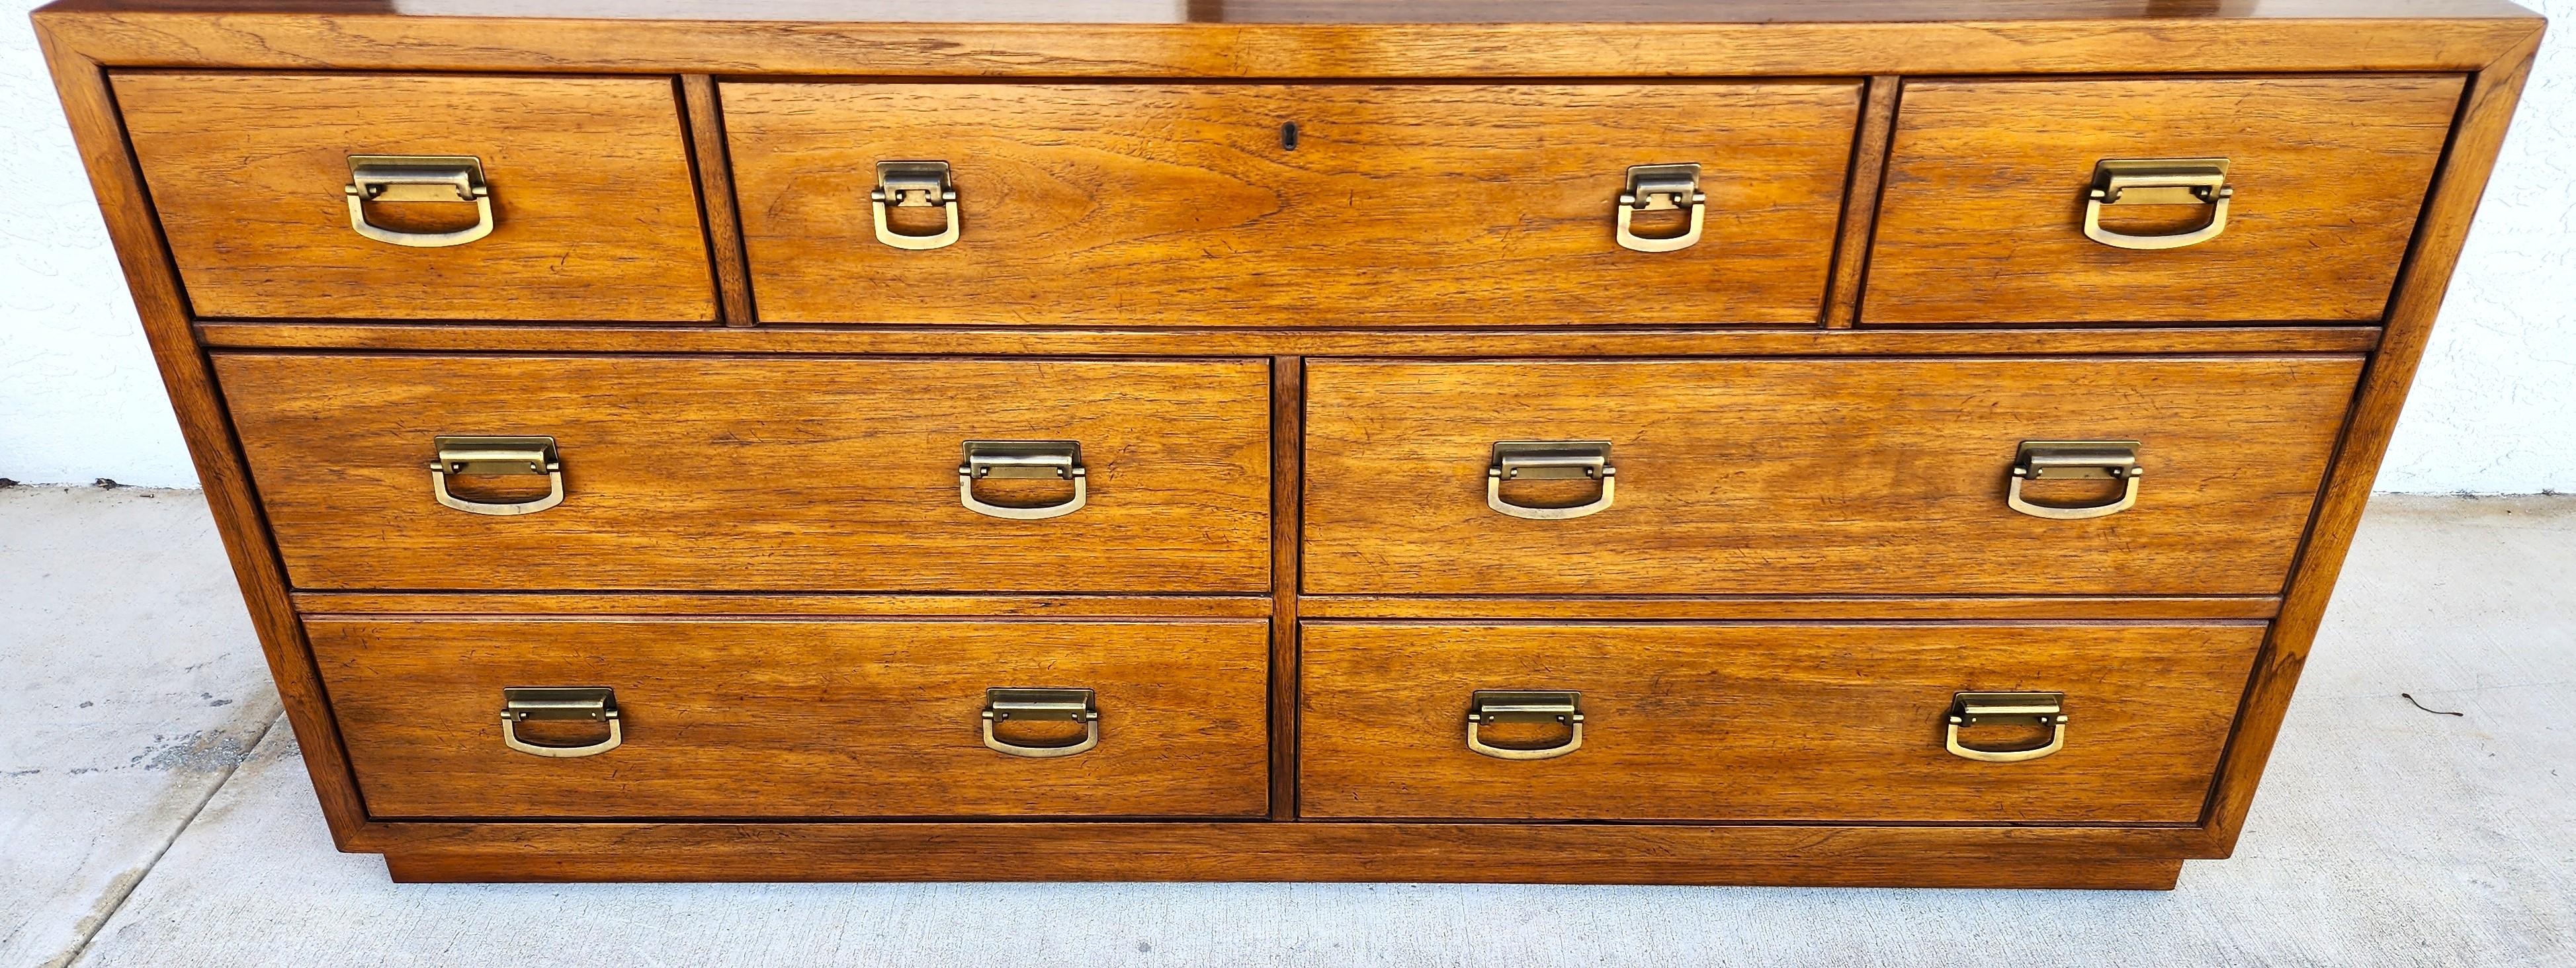 For FULL item description click on CONTINUE READING at the bottom of this page.

Offering One Of Our Recent Palm Beach Estate Fine Furniture Acquisitions Of A
MCM Lowboy Dresser WINDWOOD by Drexel
Drawers are very clean and work smoothly.

We also